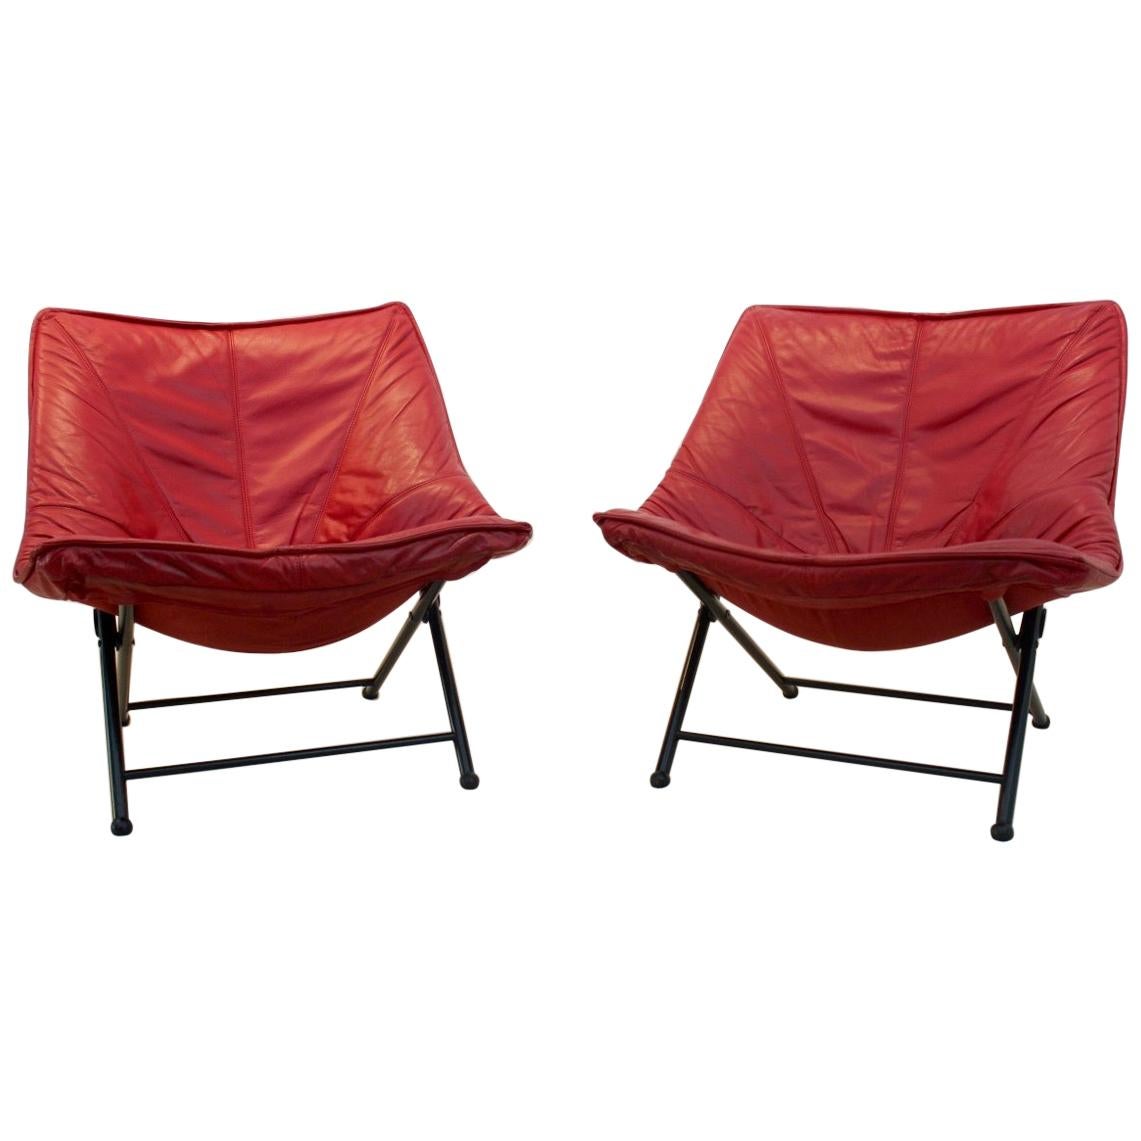 Exquisite Set of Molinari Foldable Easy Chairs Designed by Teun van Zanten 1970s For Sale